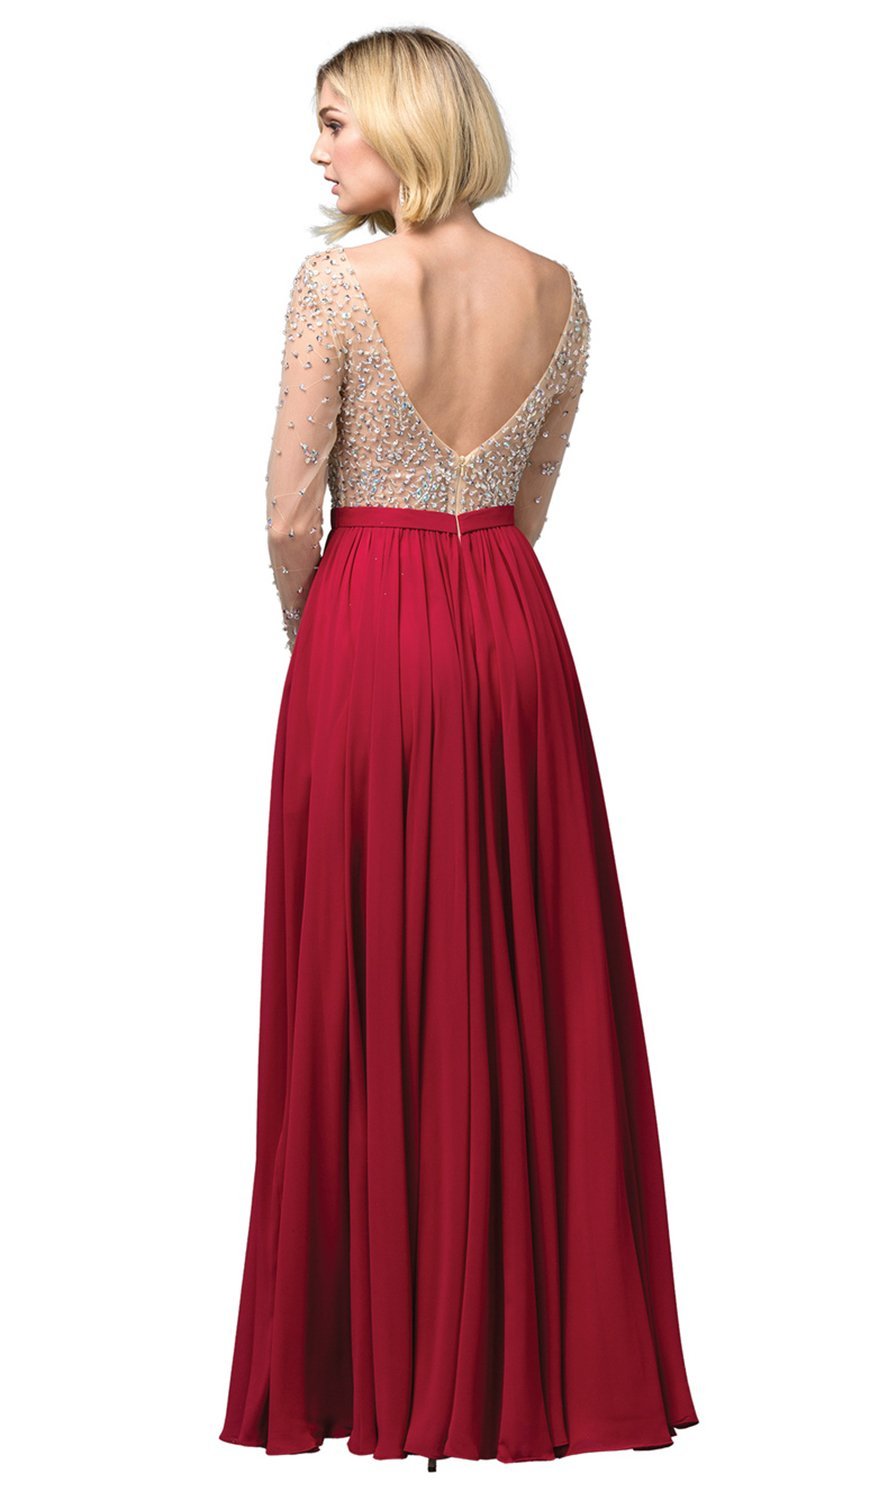 Dancing Queen - 2839 Long Sleeve Beaded Bodice A-Line Dress In Red